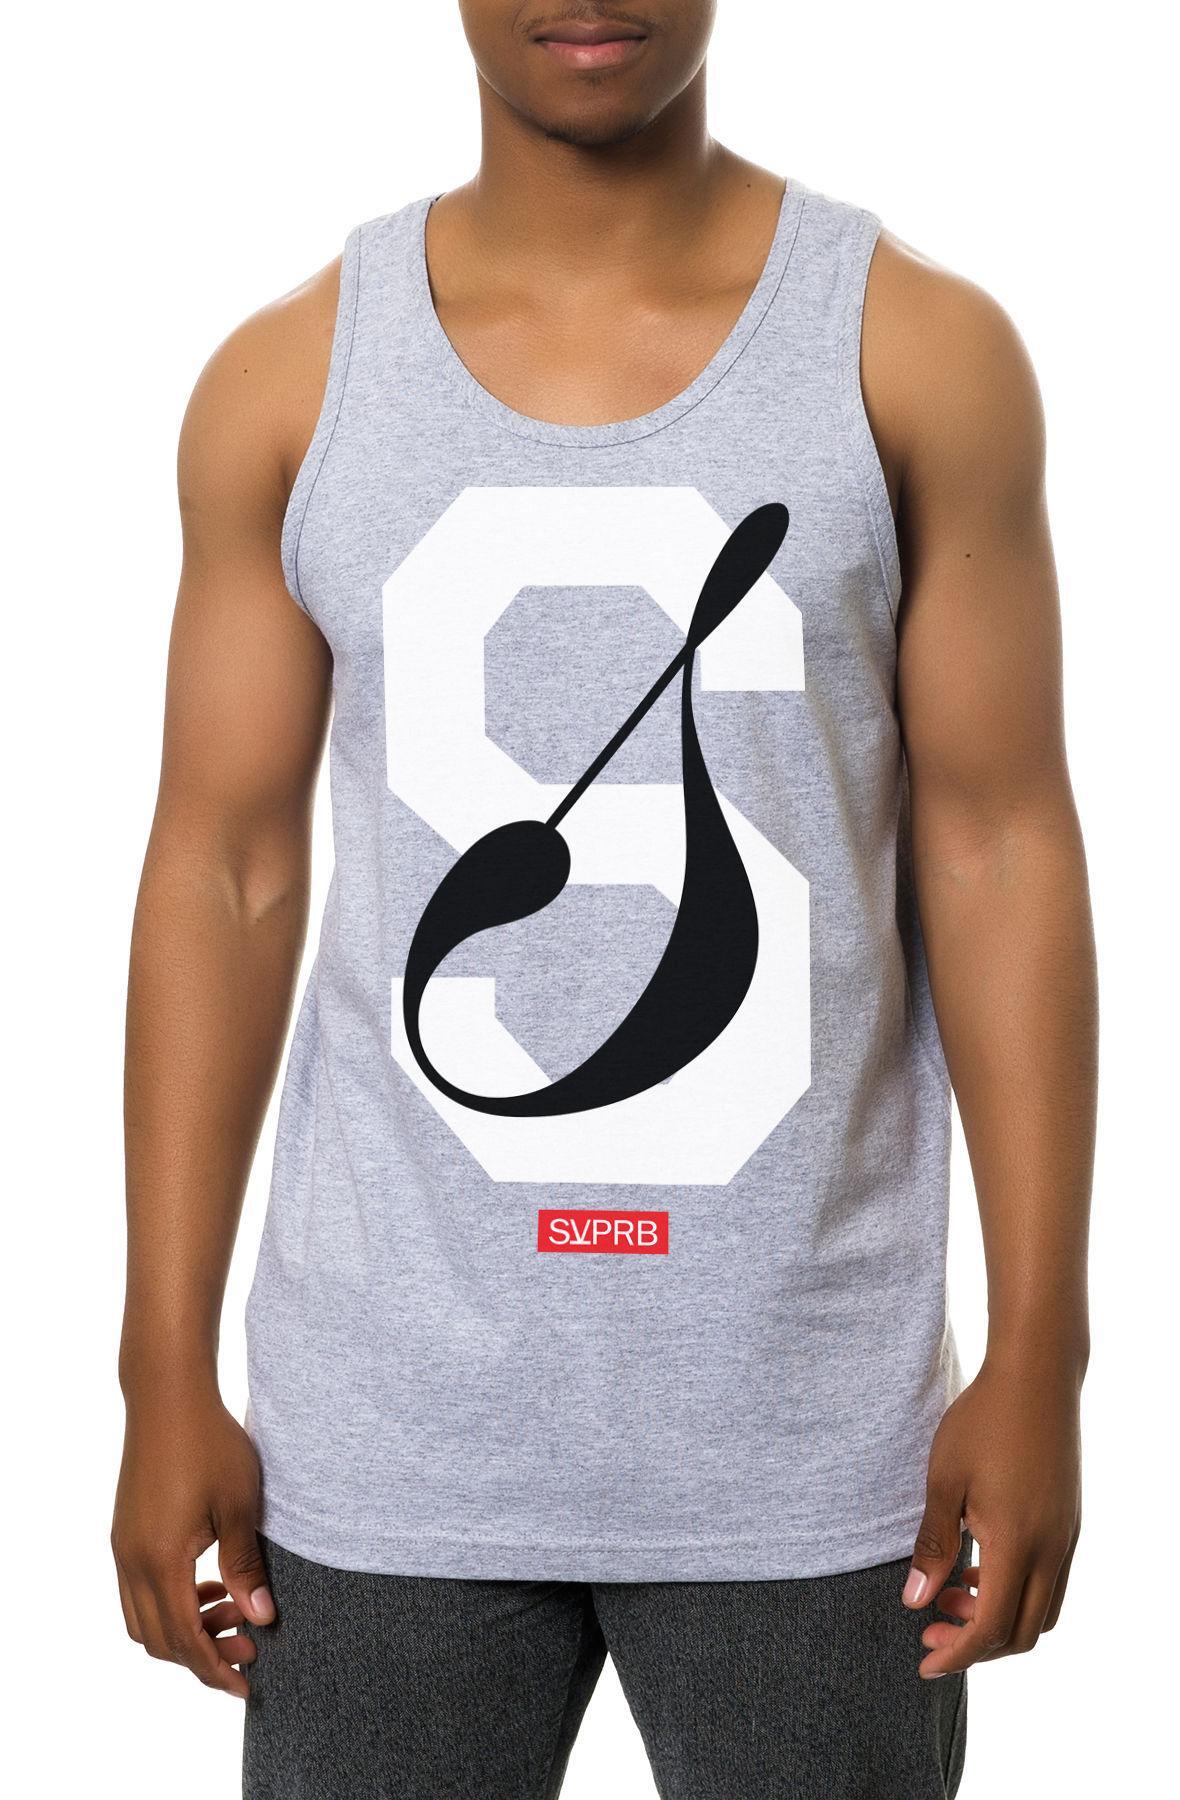 The C Notes Tank Top in Heather Grey